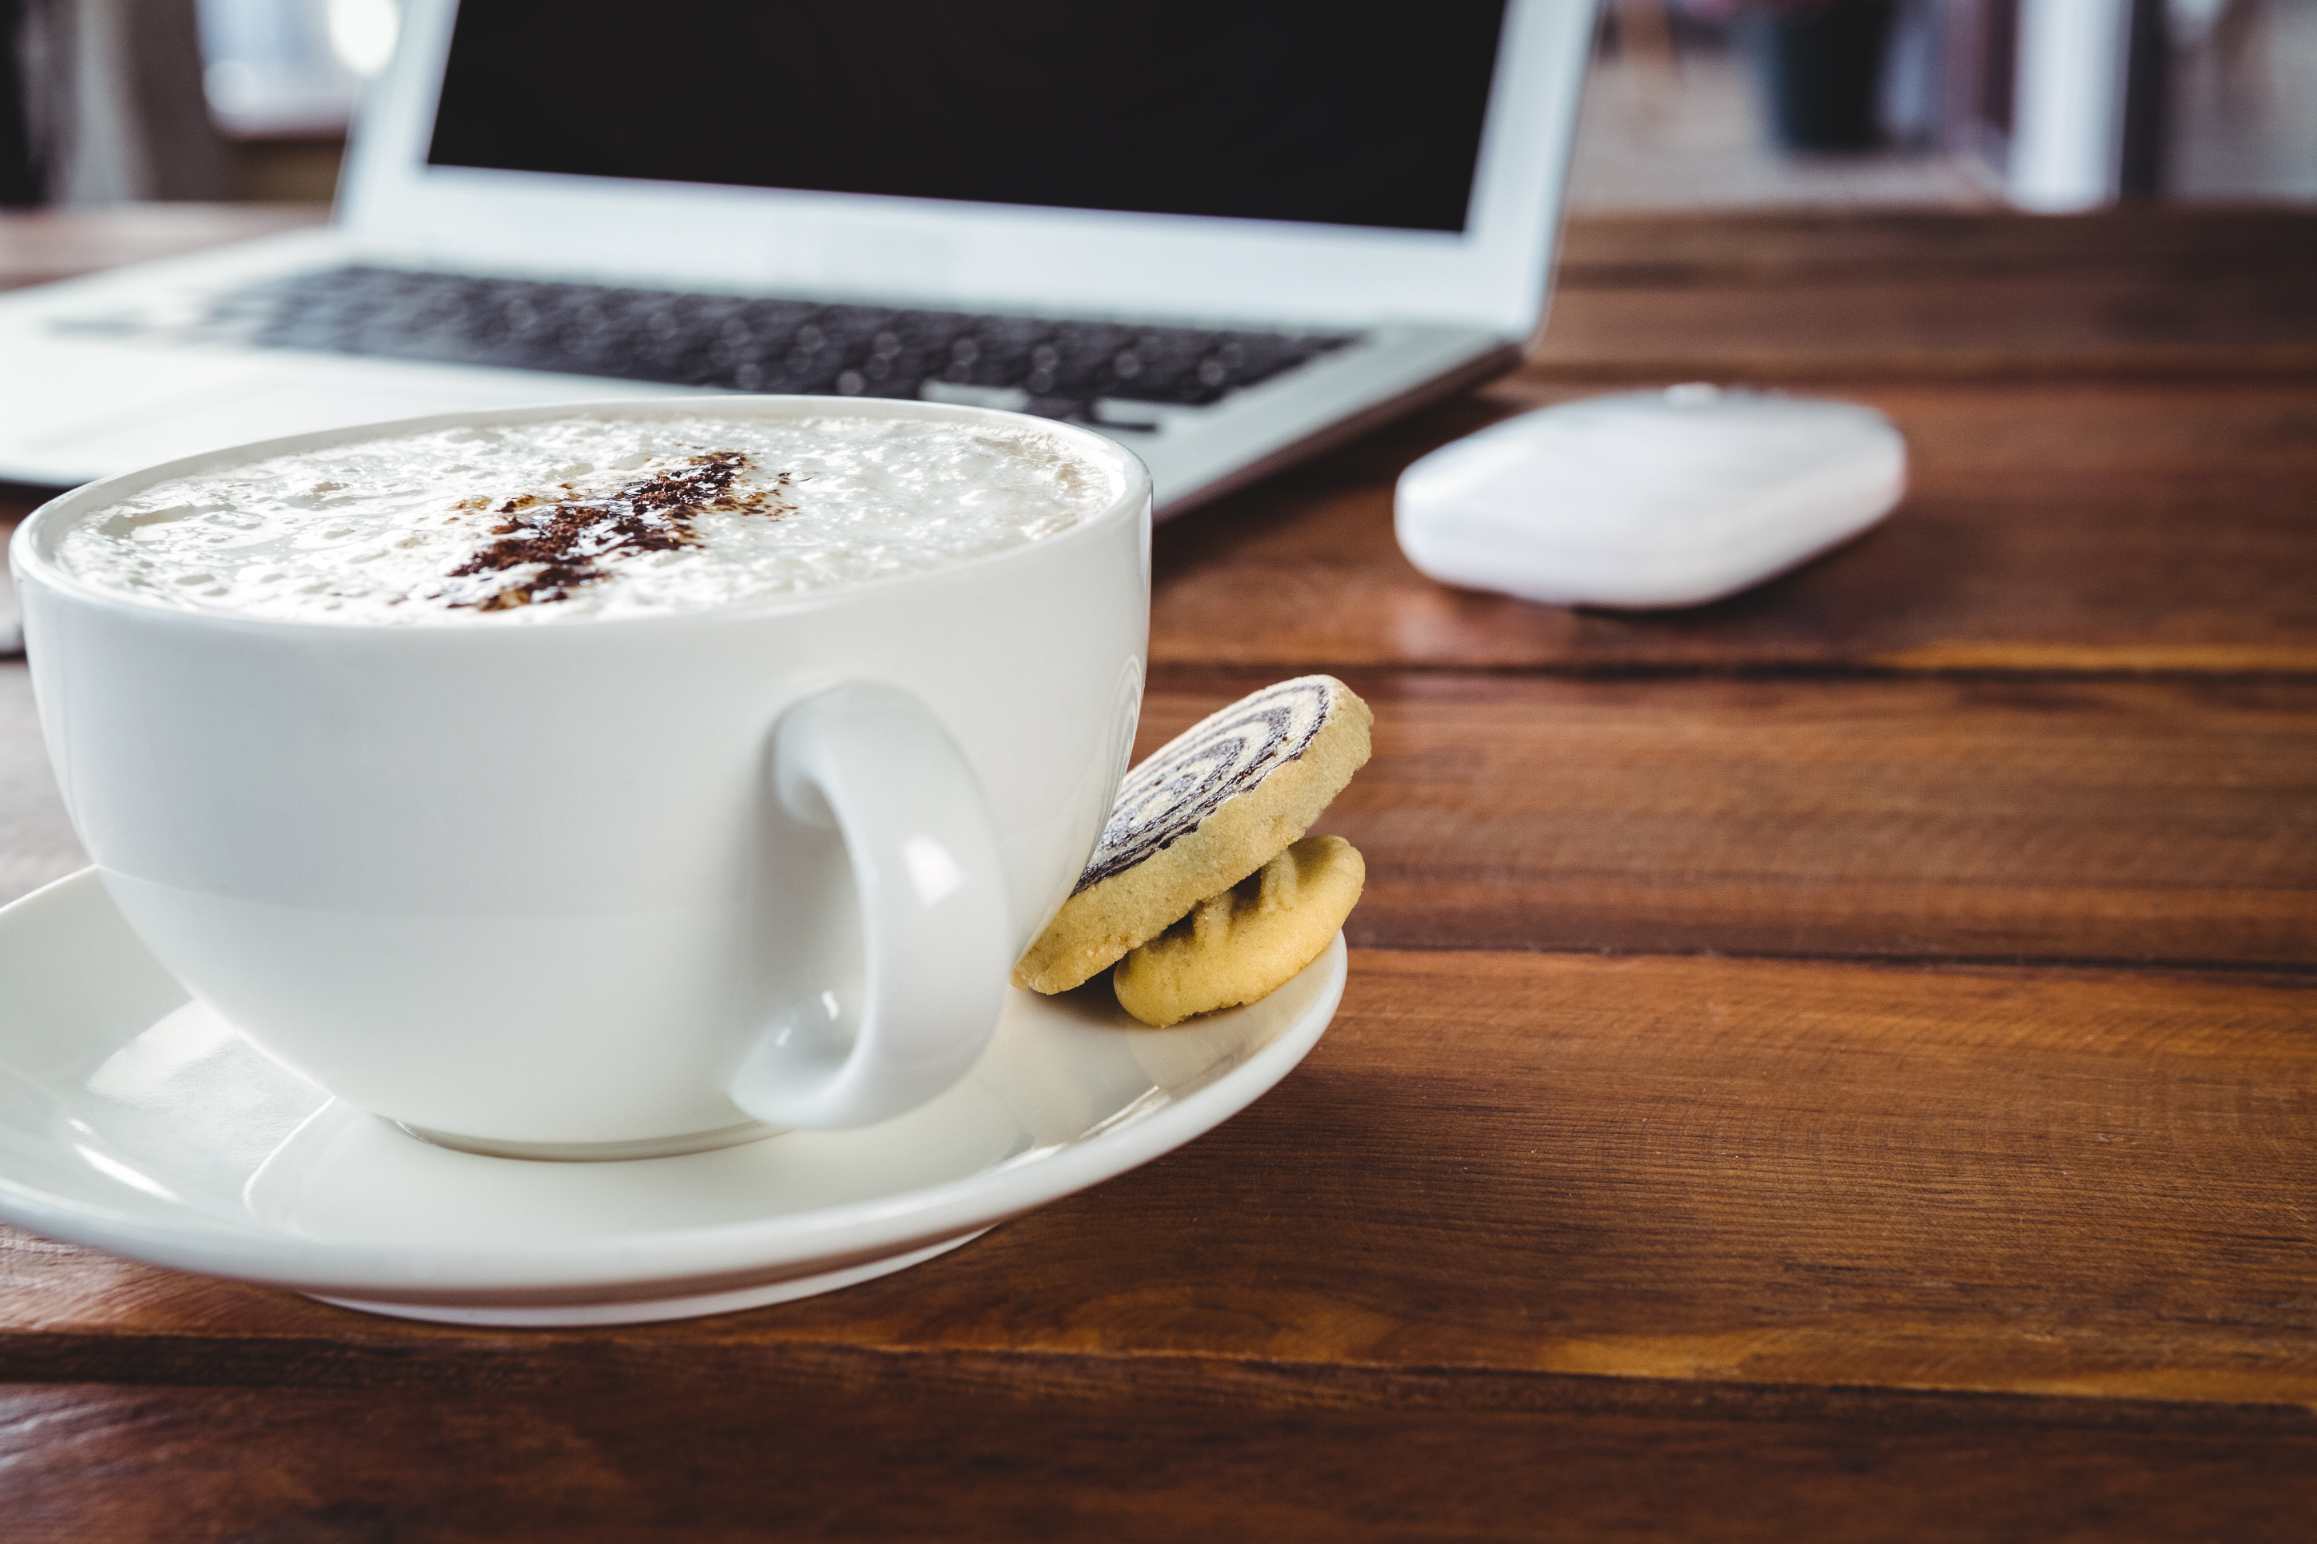 cookies and cocoa in front of laptop